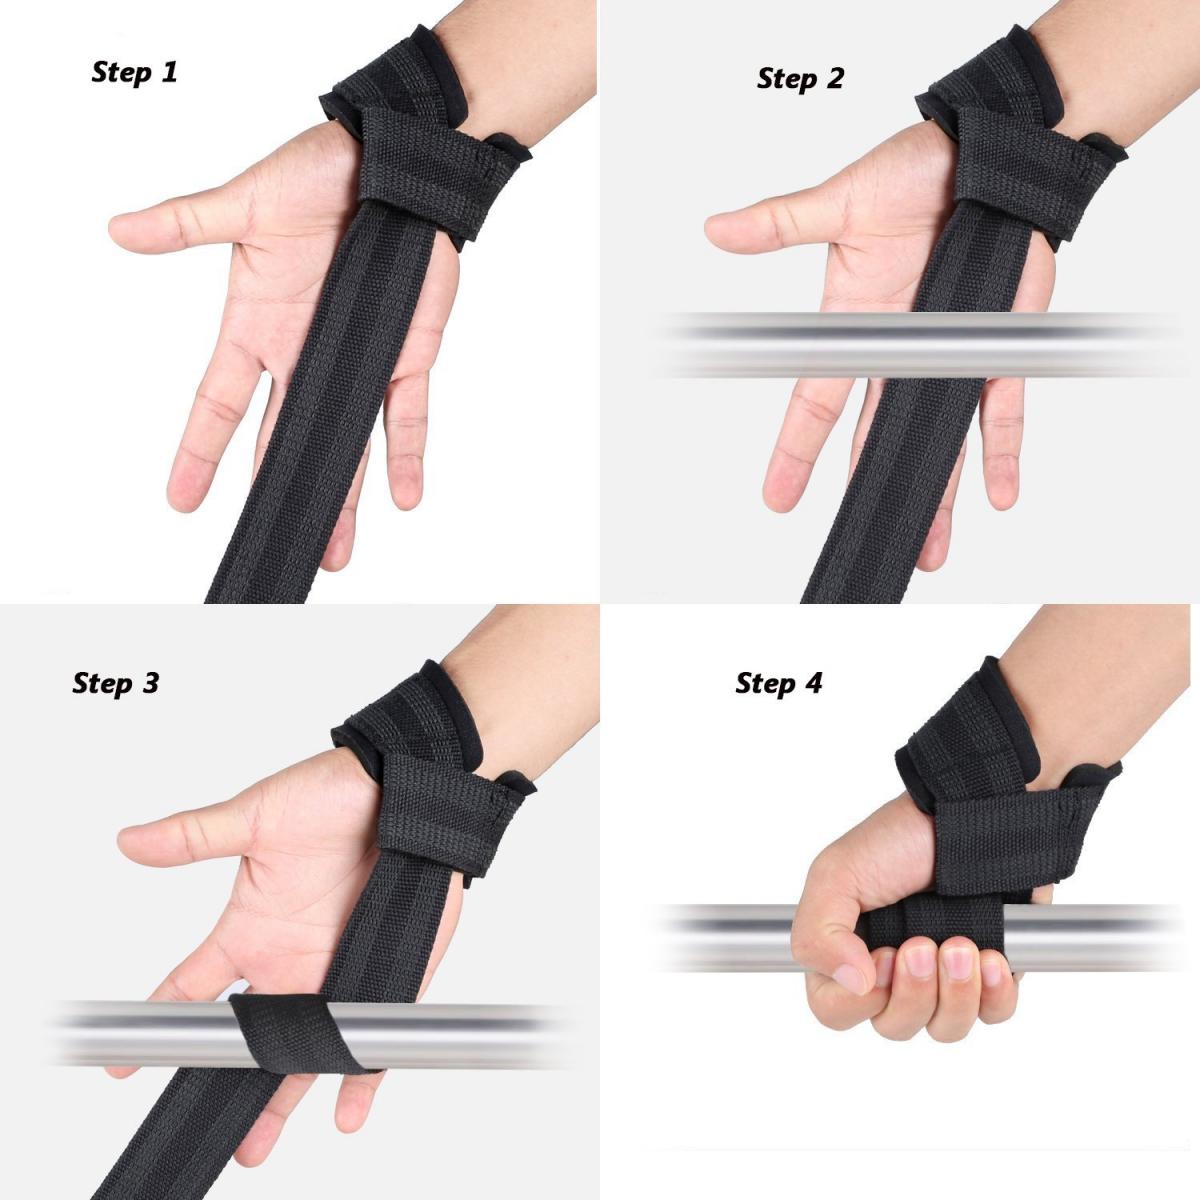 WHAT IS LIFTING STRAPS & HOW TO USE LIFTING STRAPS.